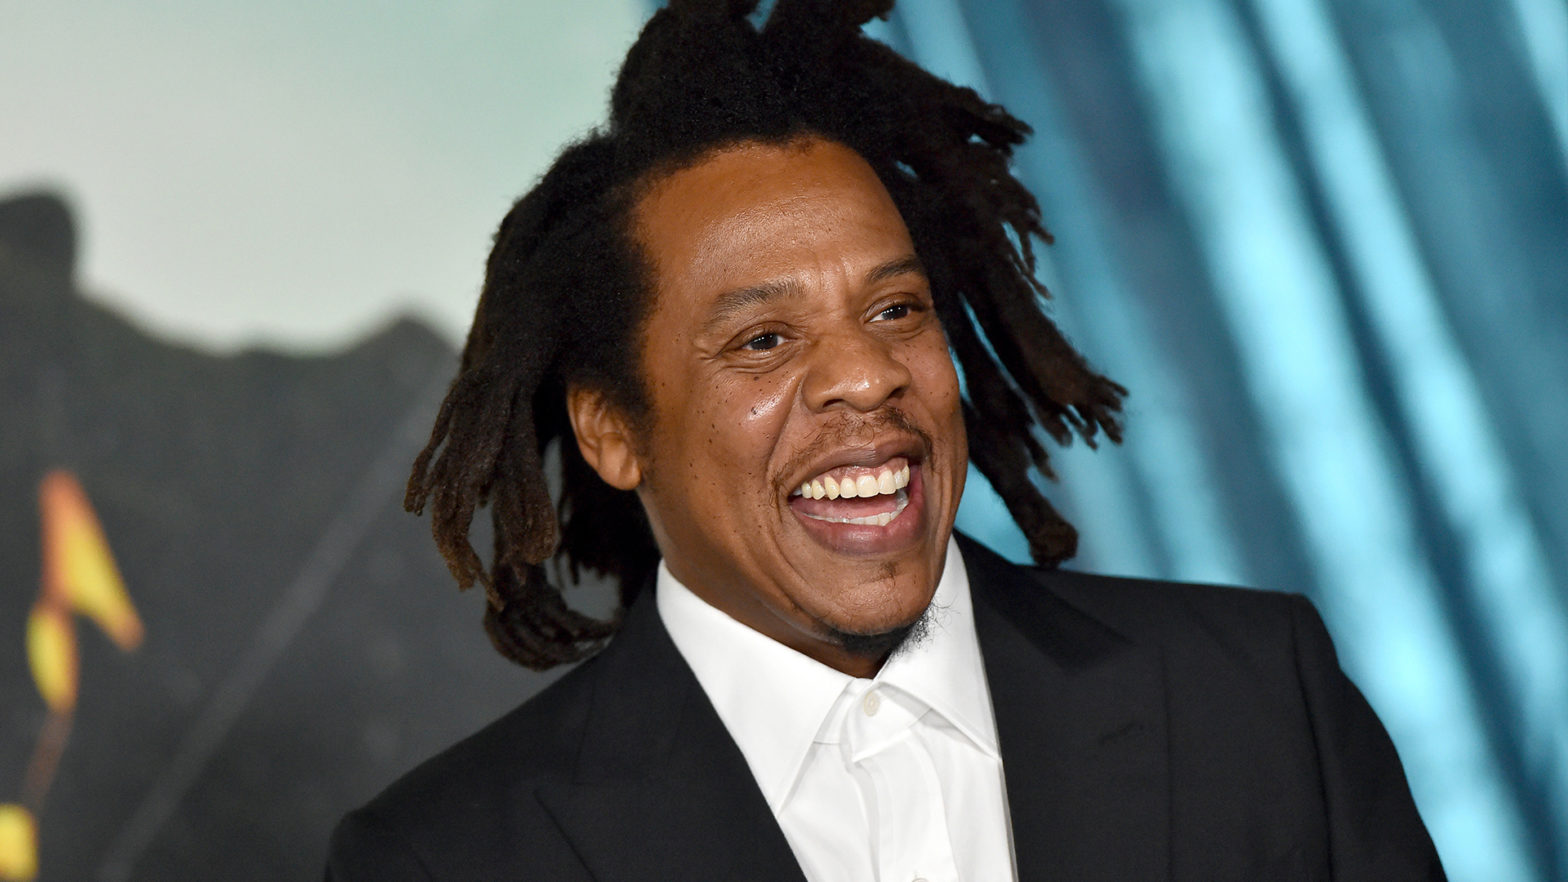 Jay-Z Awarded $4.5M In Unpaid Royalties From Fragrance Company Parlux